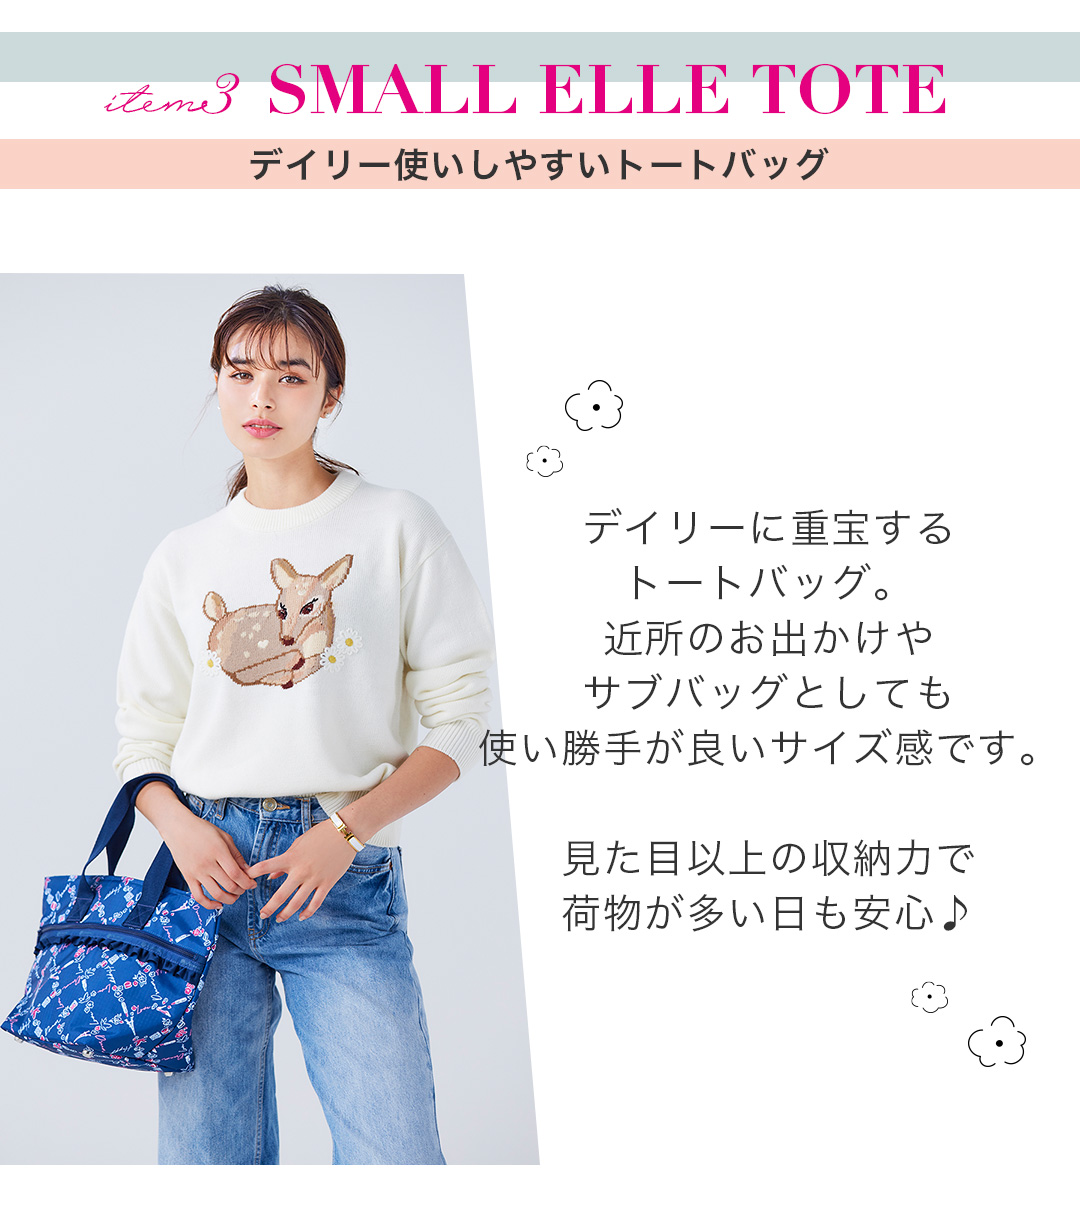 SMALL ELLE TOTE デイリー使いしやすいトートバッグ